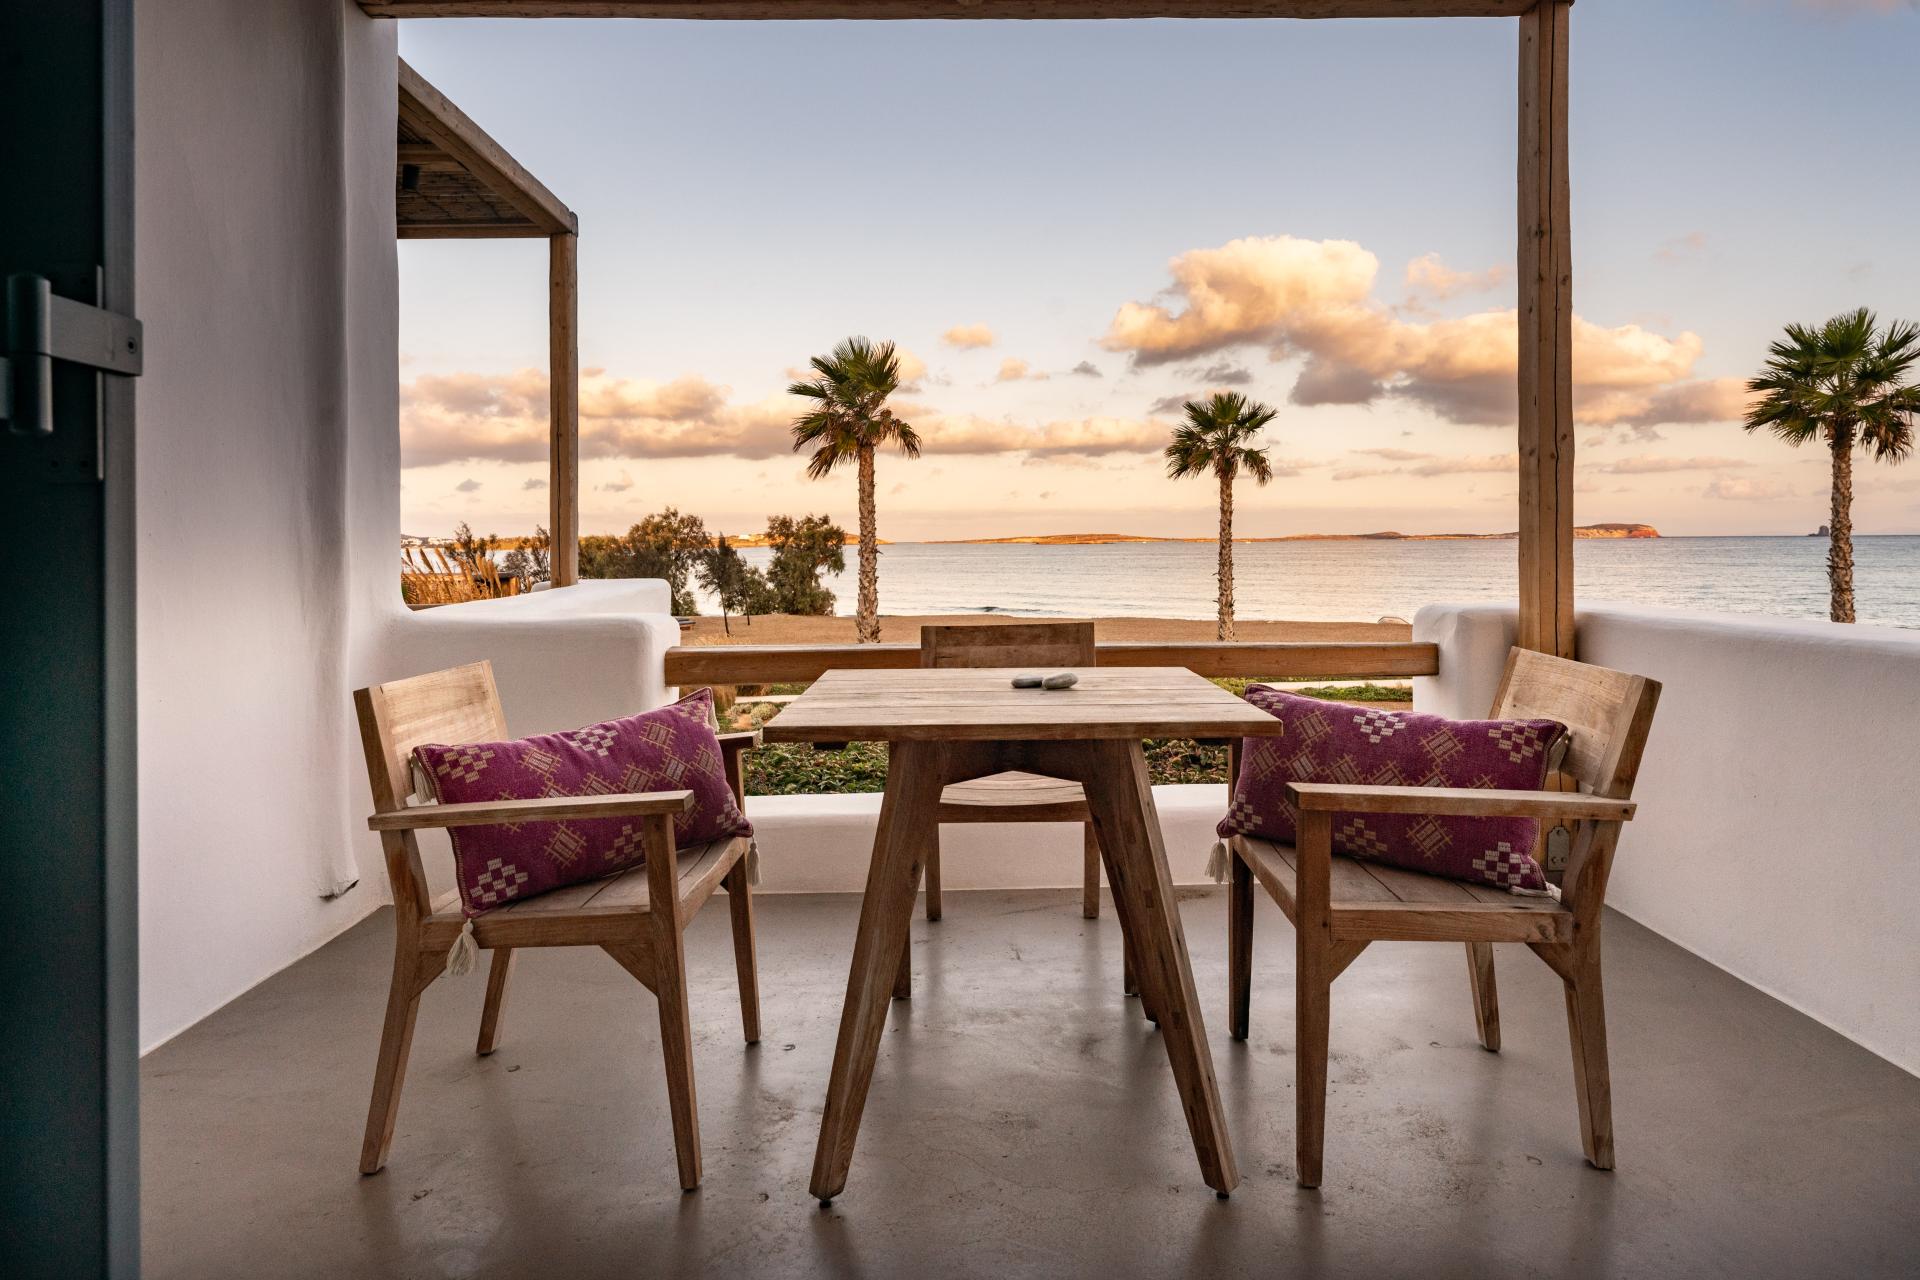 A table and three chairs in the terrace and the sea in the background